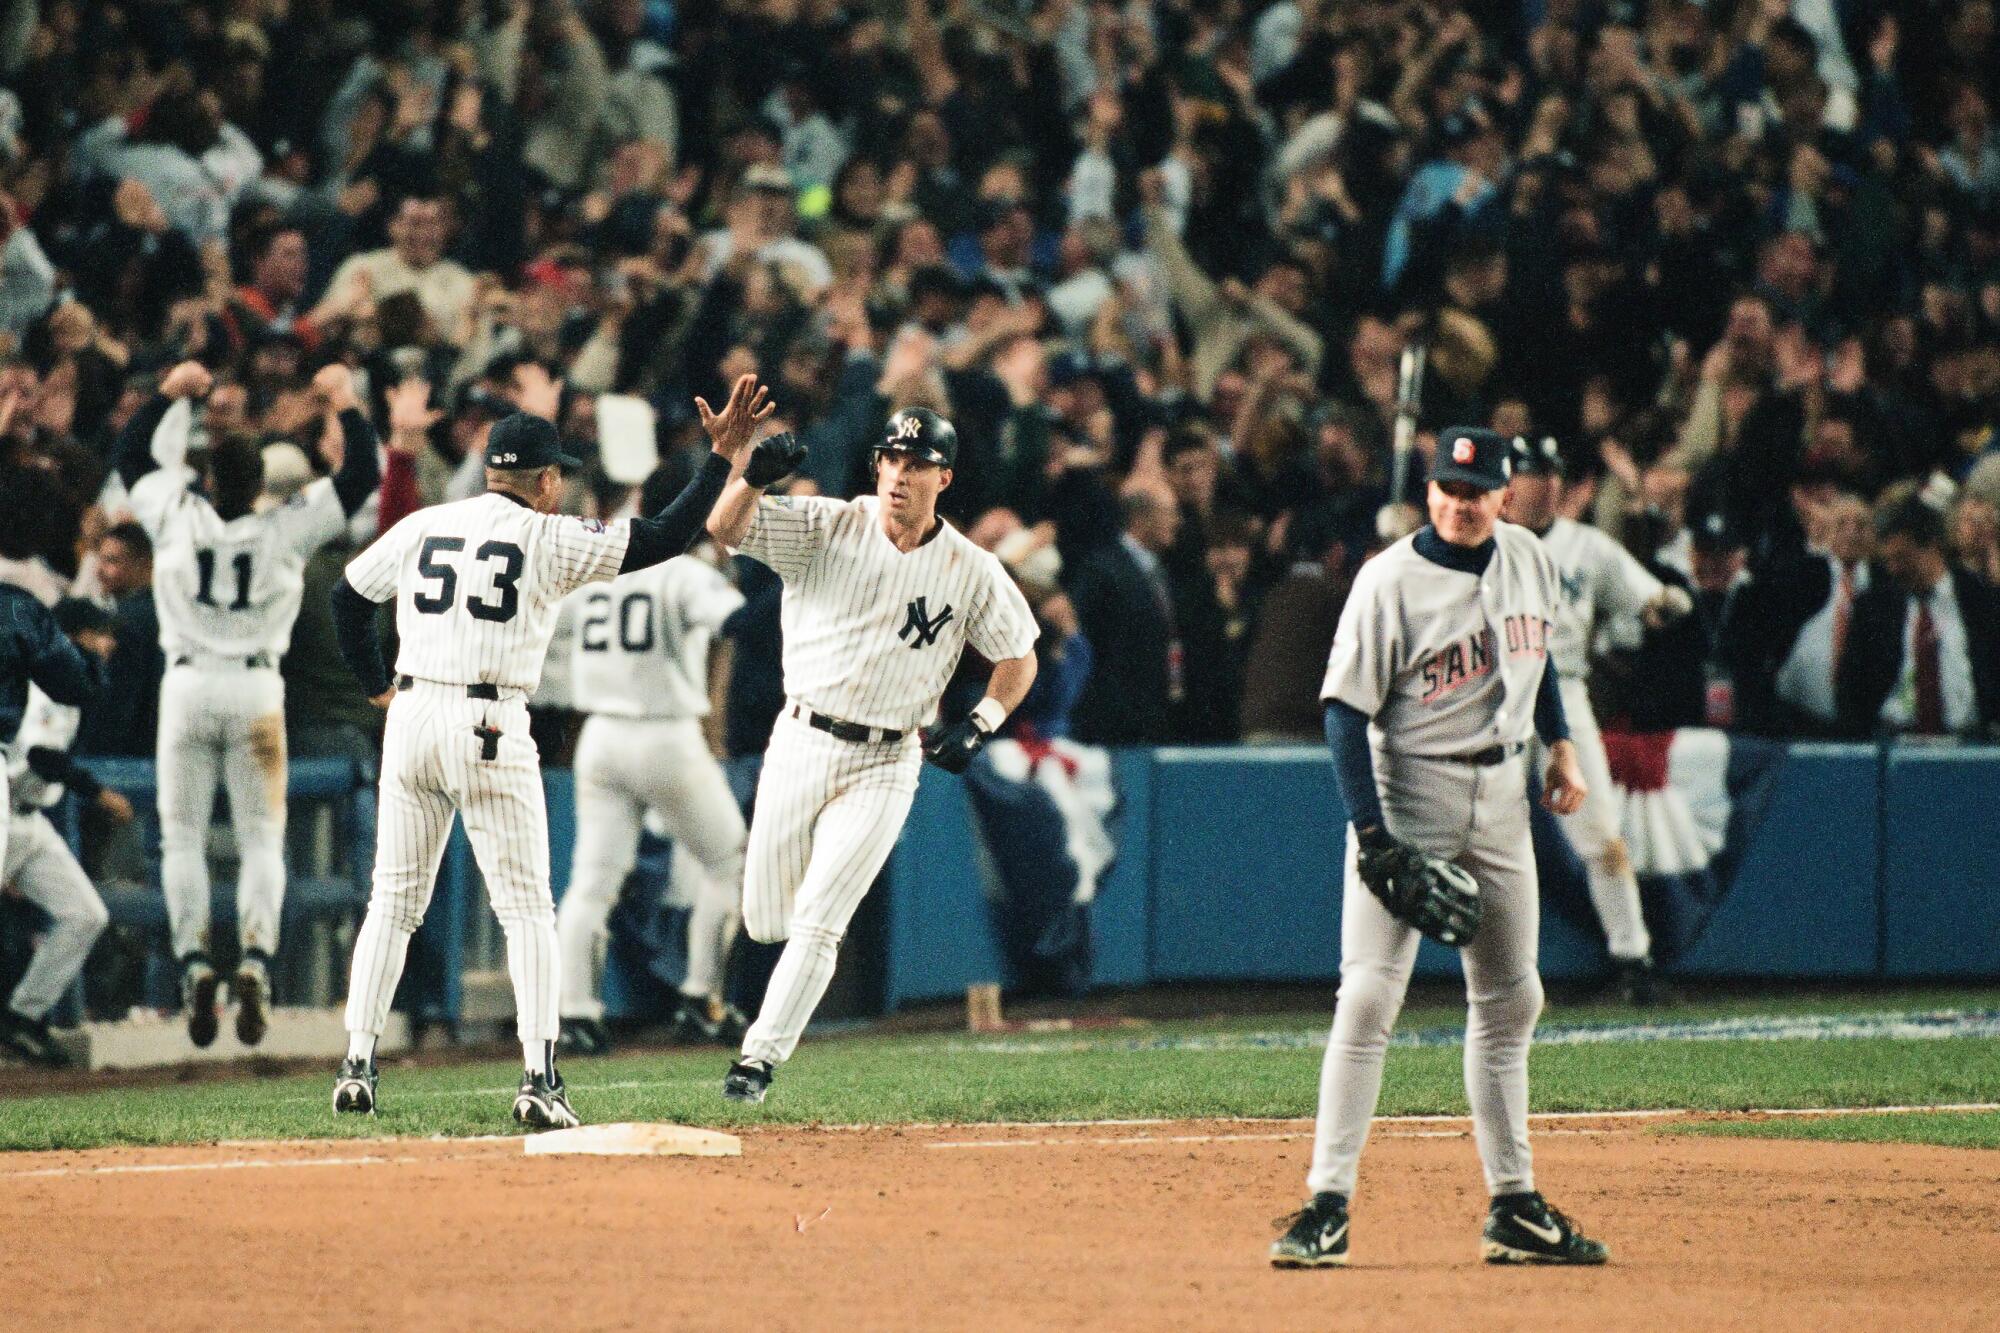 After 25 years, it's time to admit that a blown call didn't cost Padres  Game 1 of the 1998 World Series - The San Diego Union-Tribune